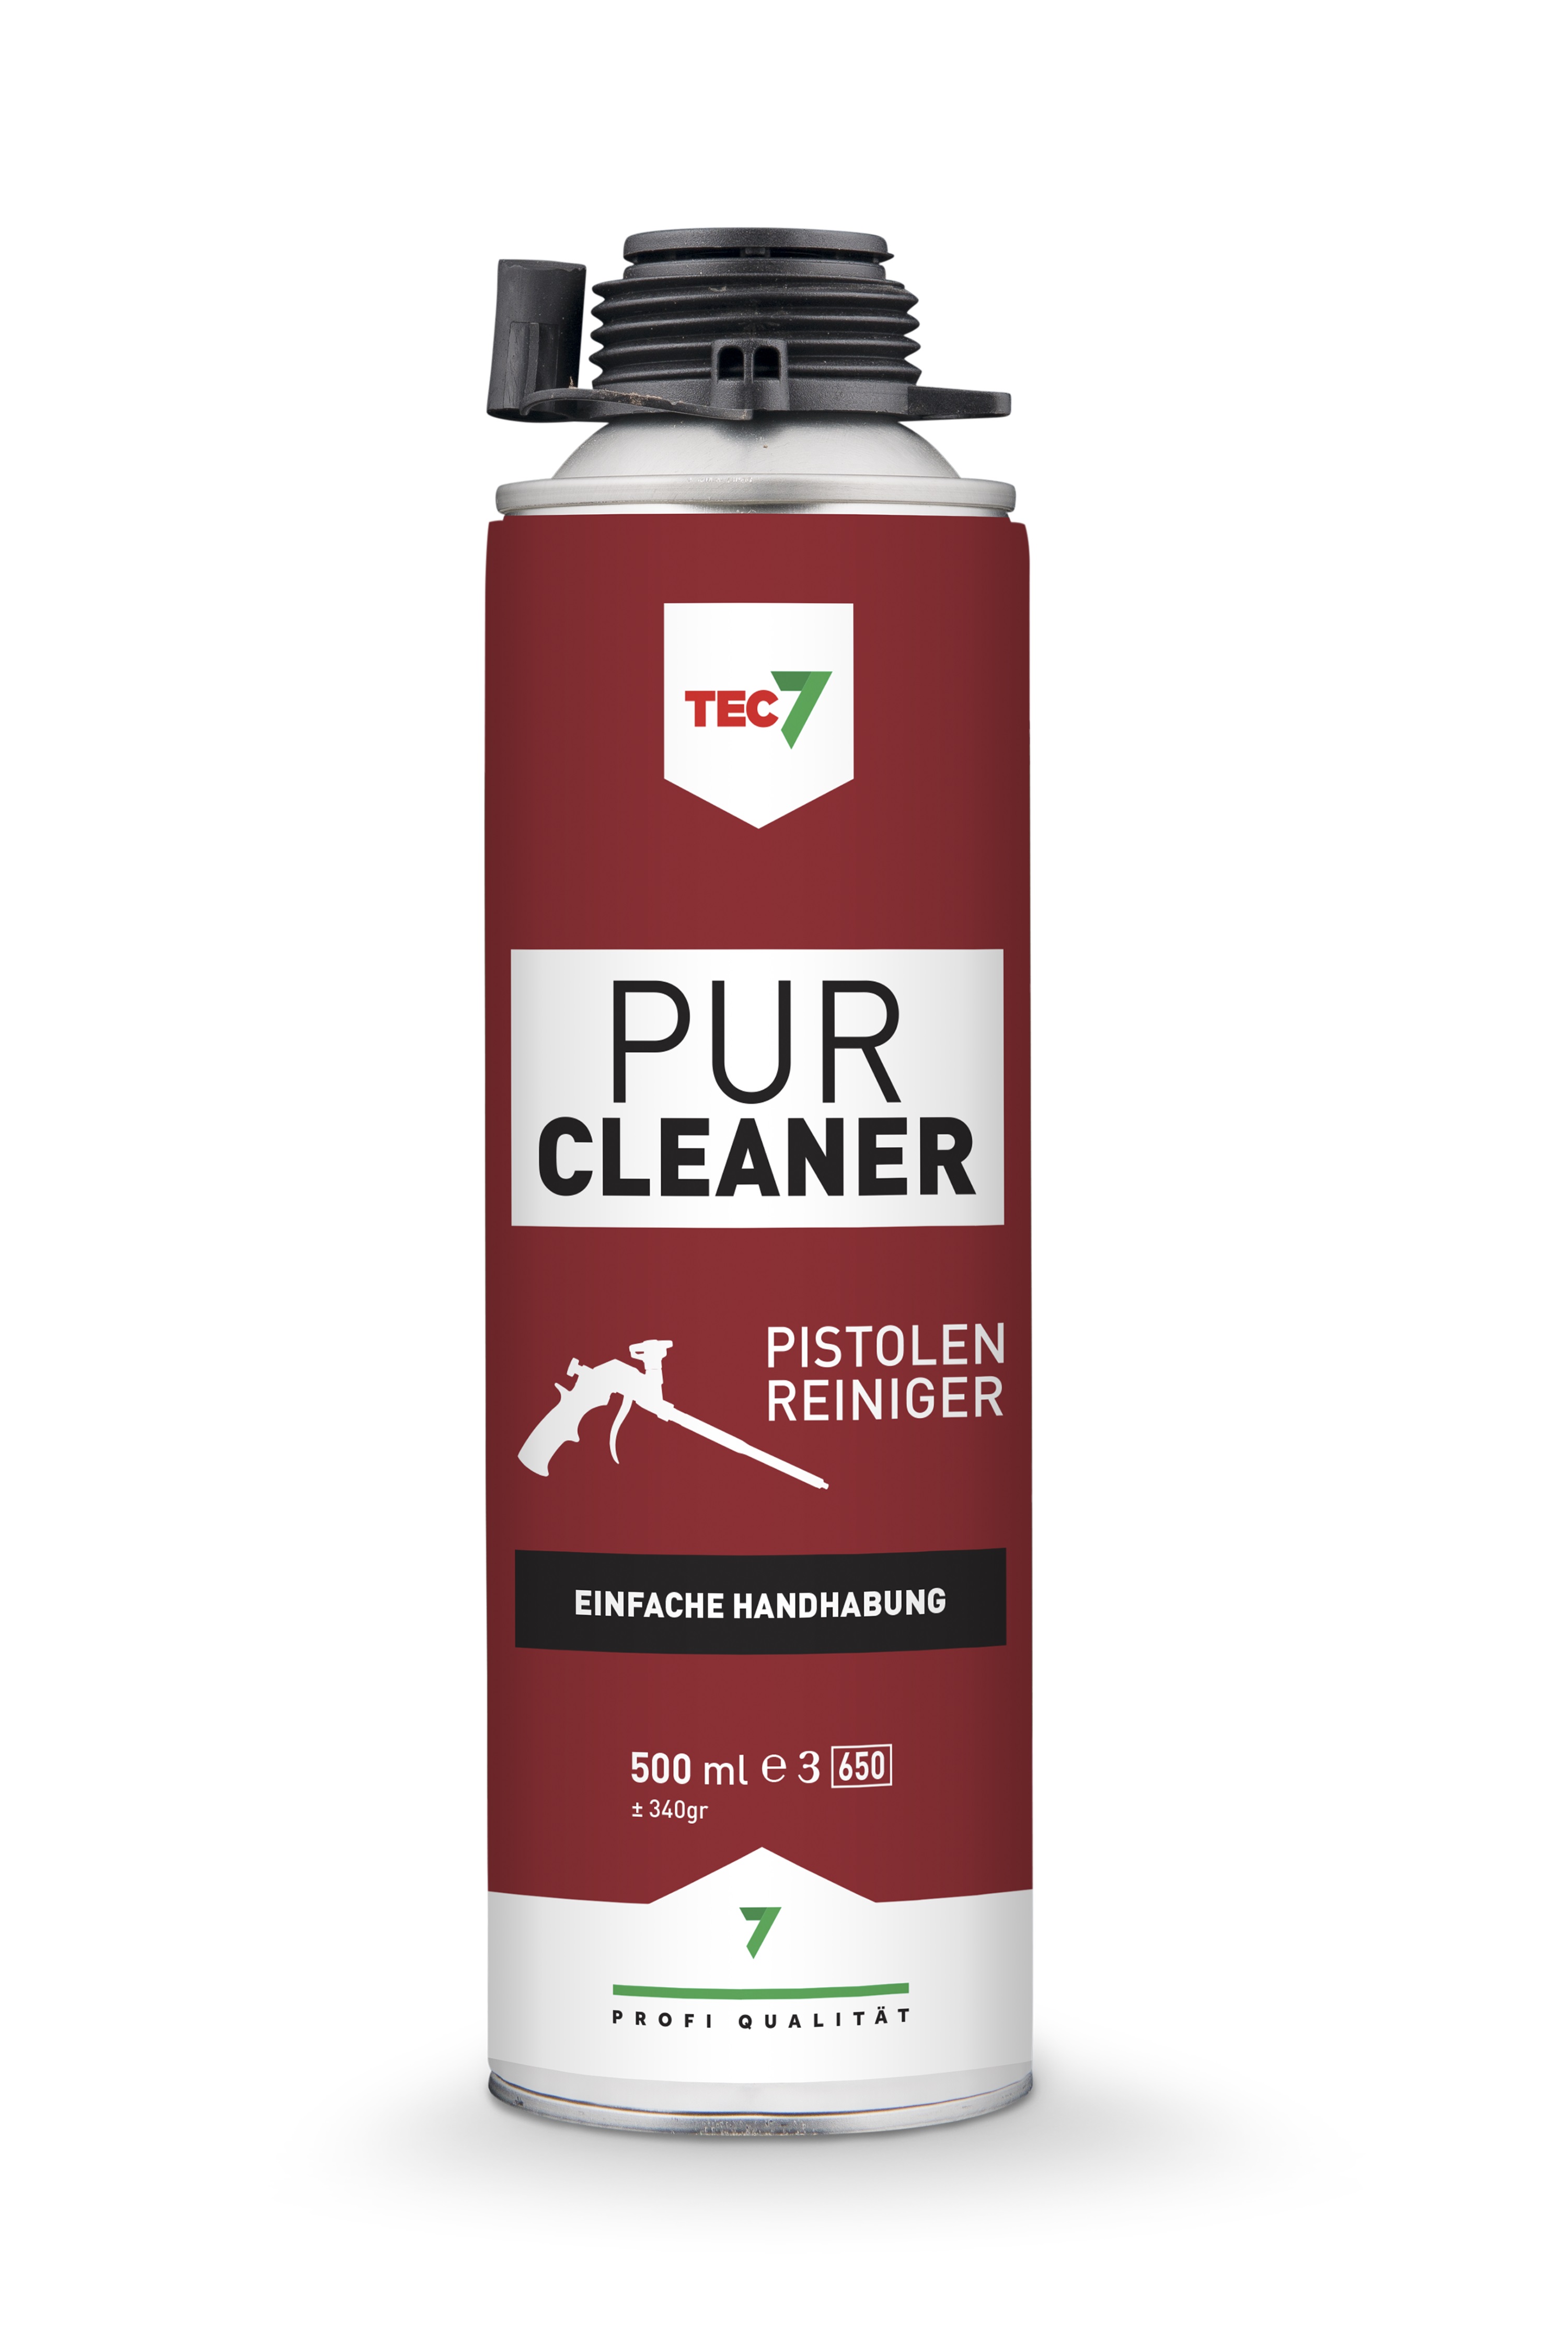 Pur Cleaner